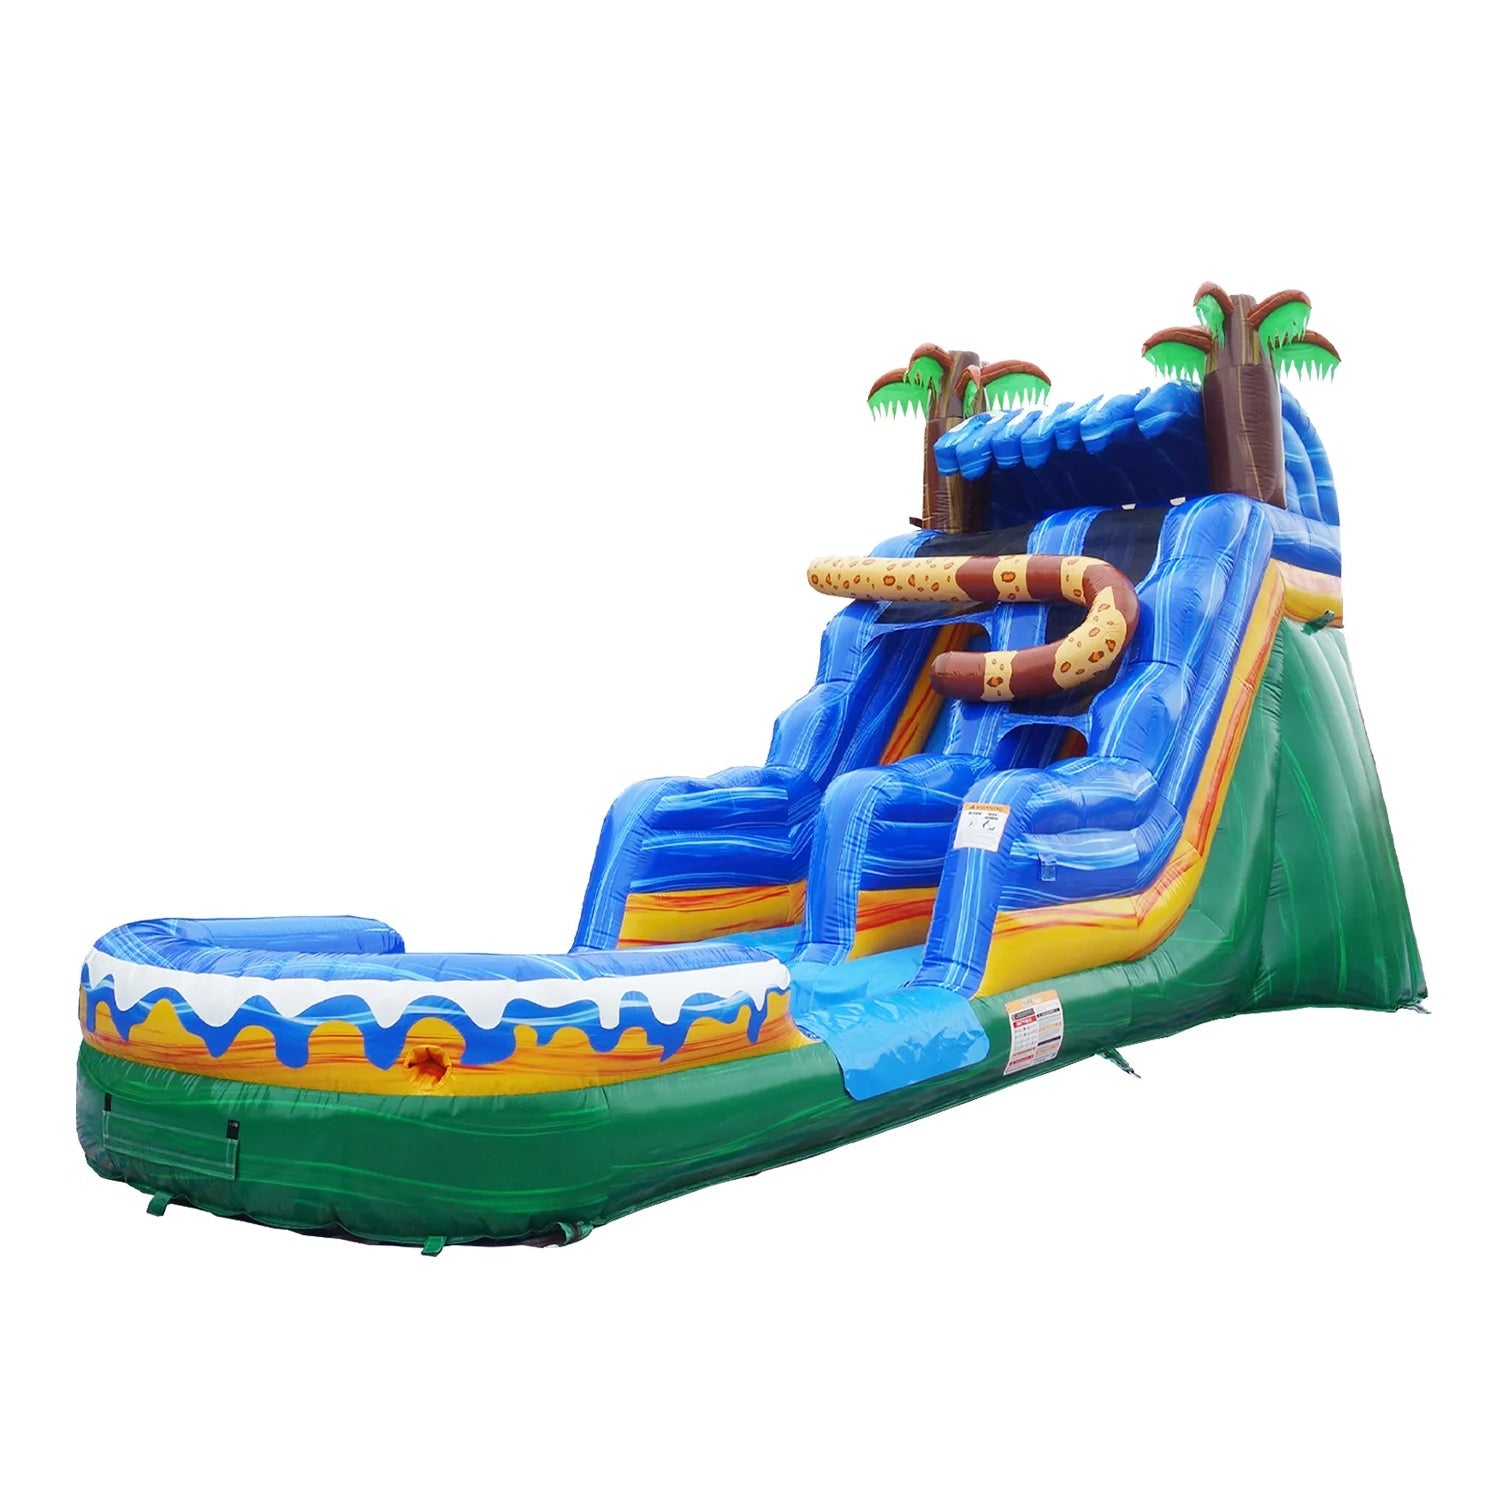 Jaguar Commercial Grade Inflatable Water Slide Into Pool Tropical Jungle Waterslide For Home